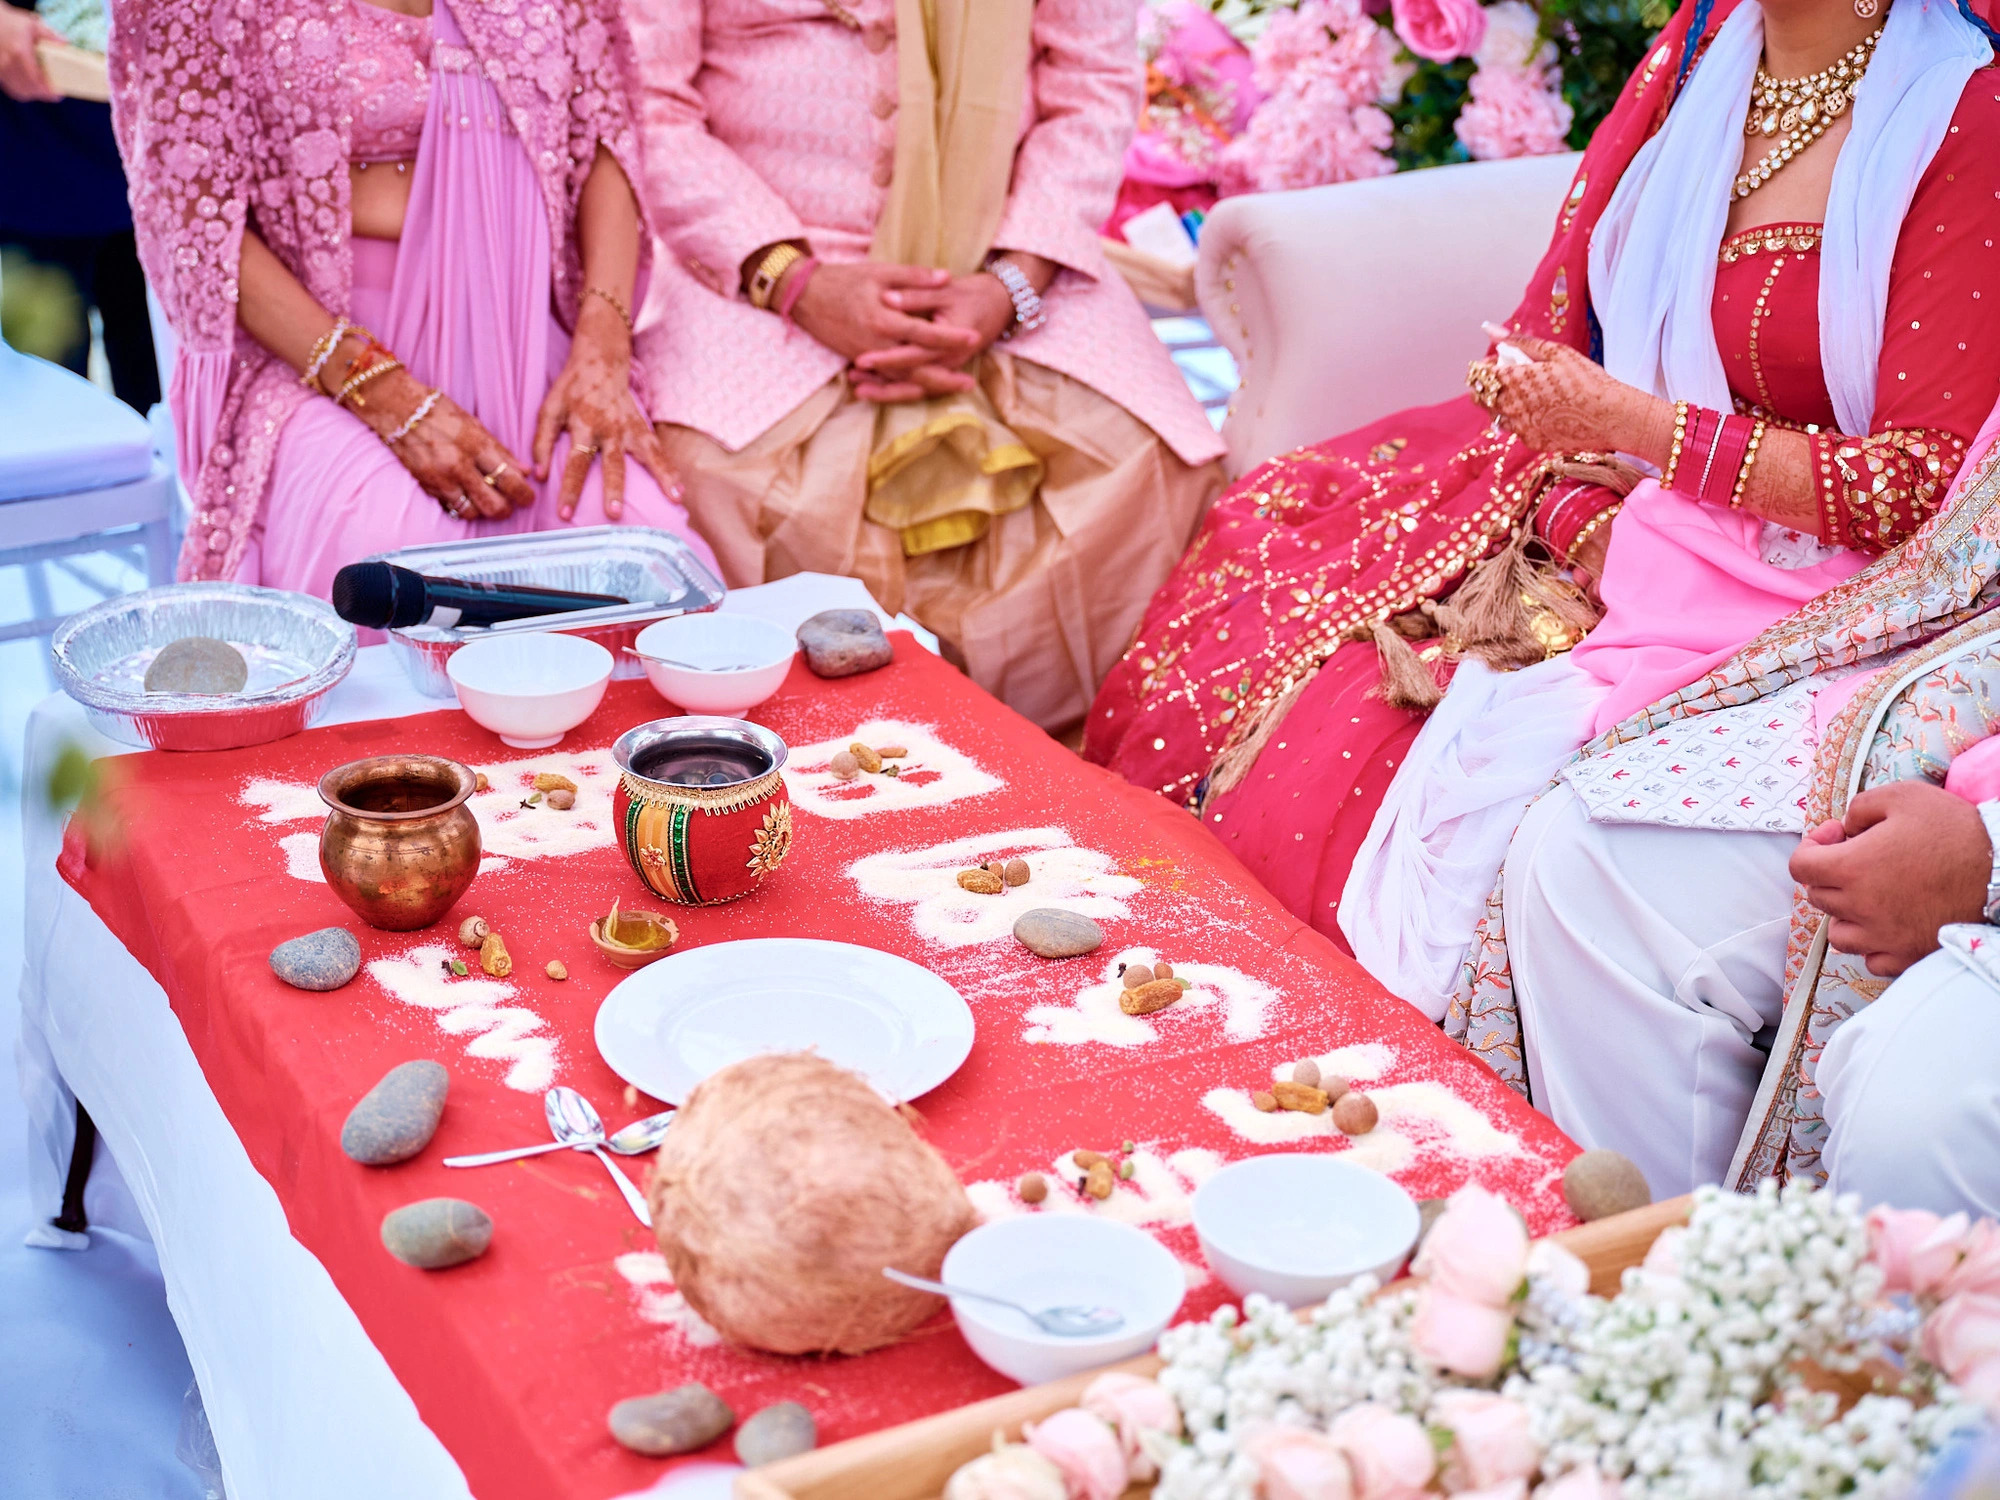 The three-day wedding celebration featured all of the Indian wedding traditions. Photo: Supplied